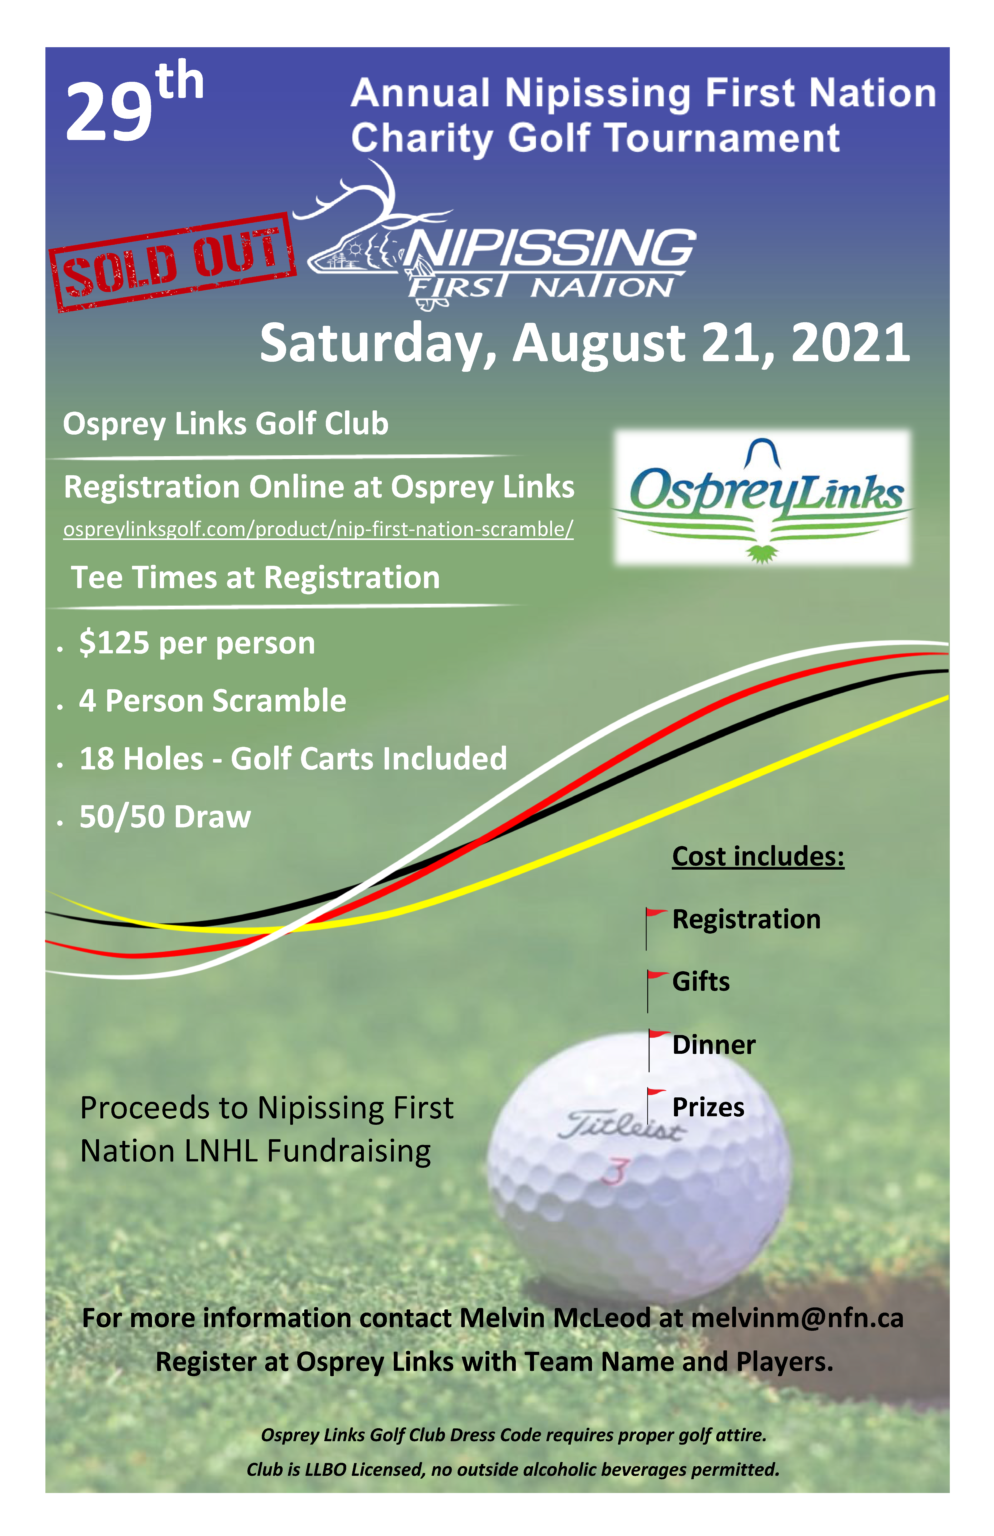 Annual Charity Golf Tournament SOLD OUT » Nipissing First Nation